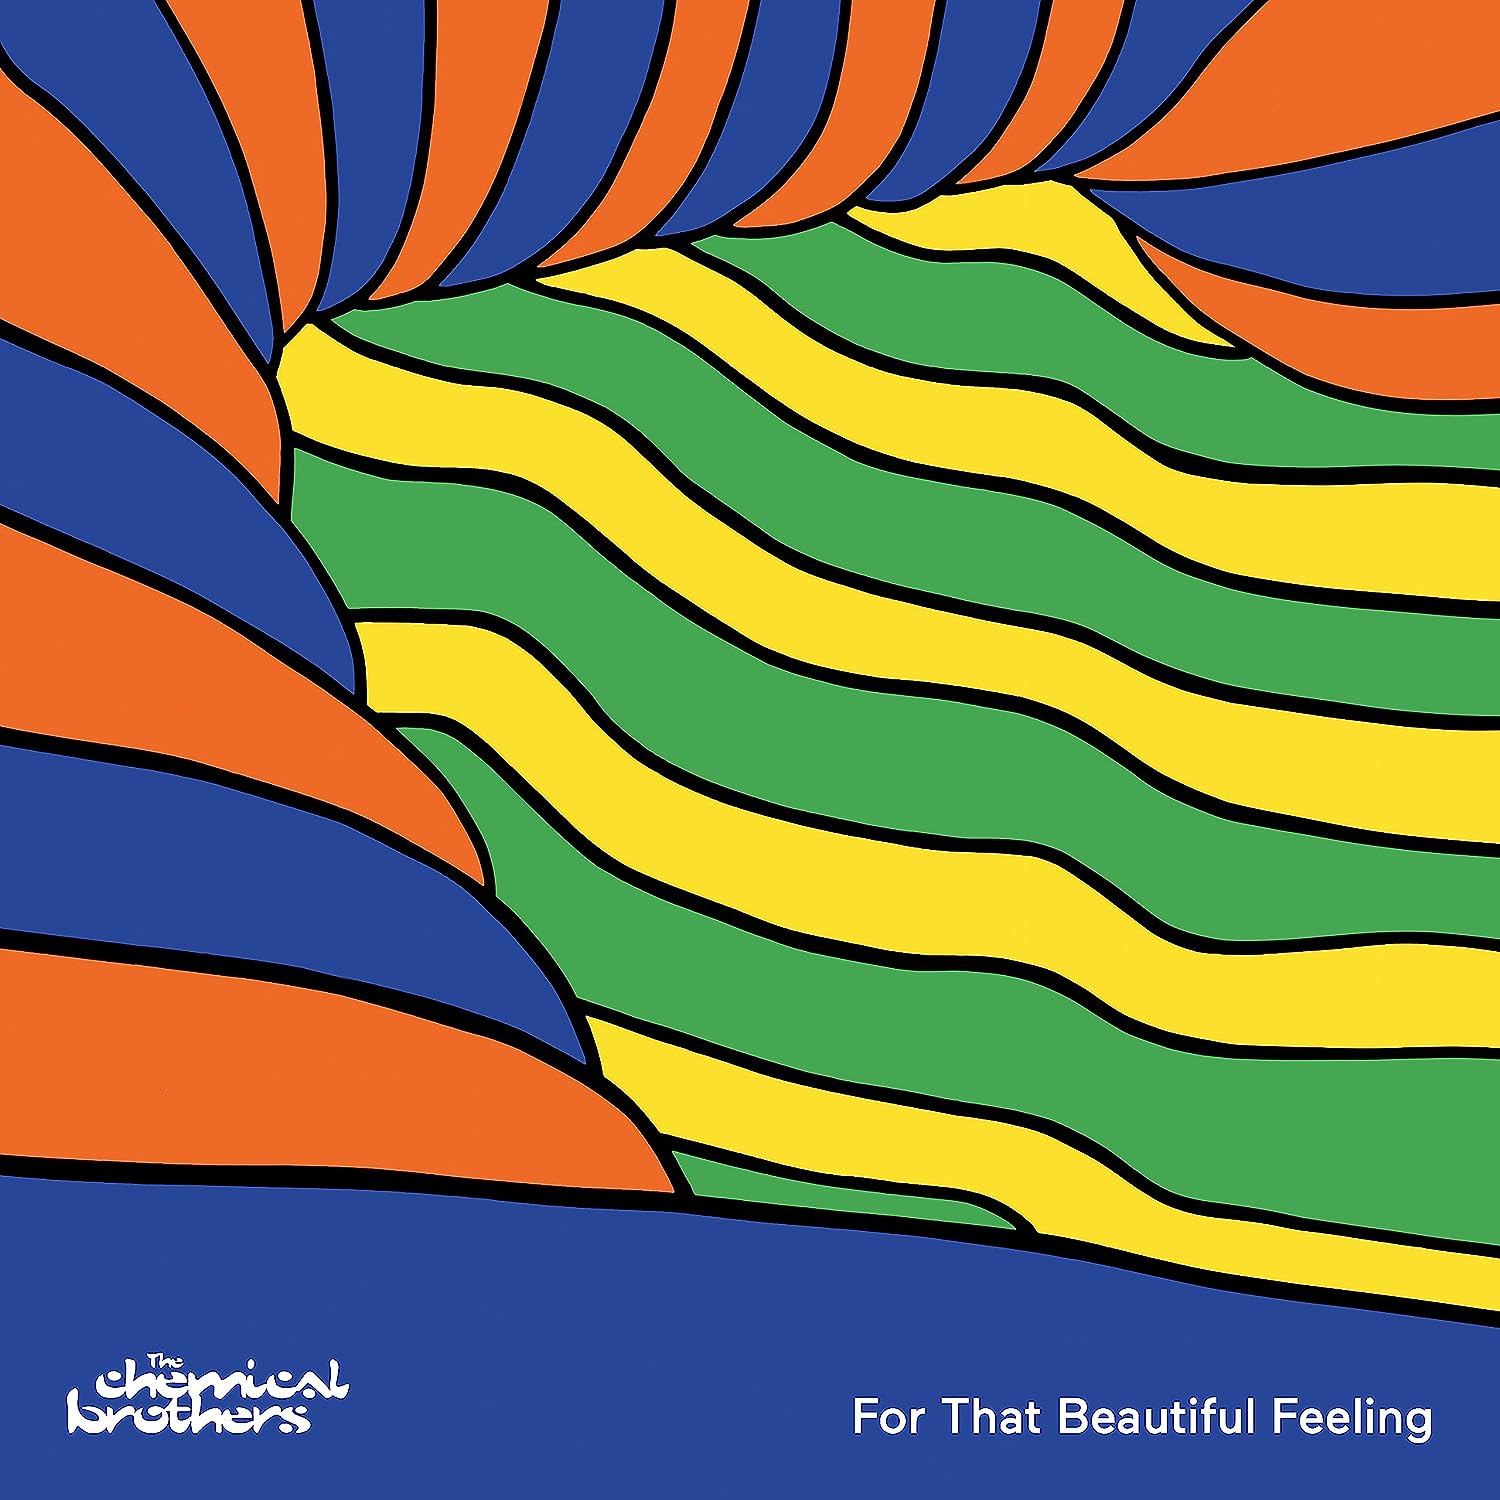 Chemical Brothers For That Beautiful Feeling - Ireland Vinyl